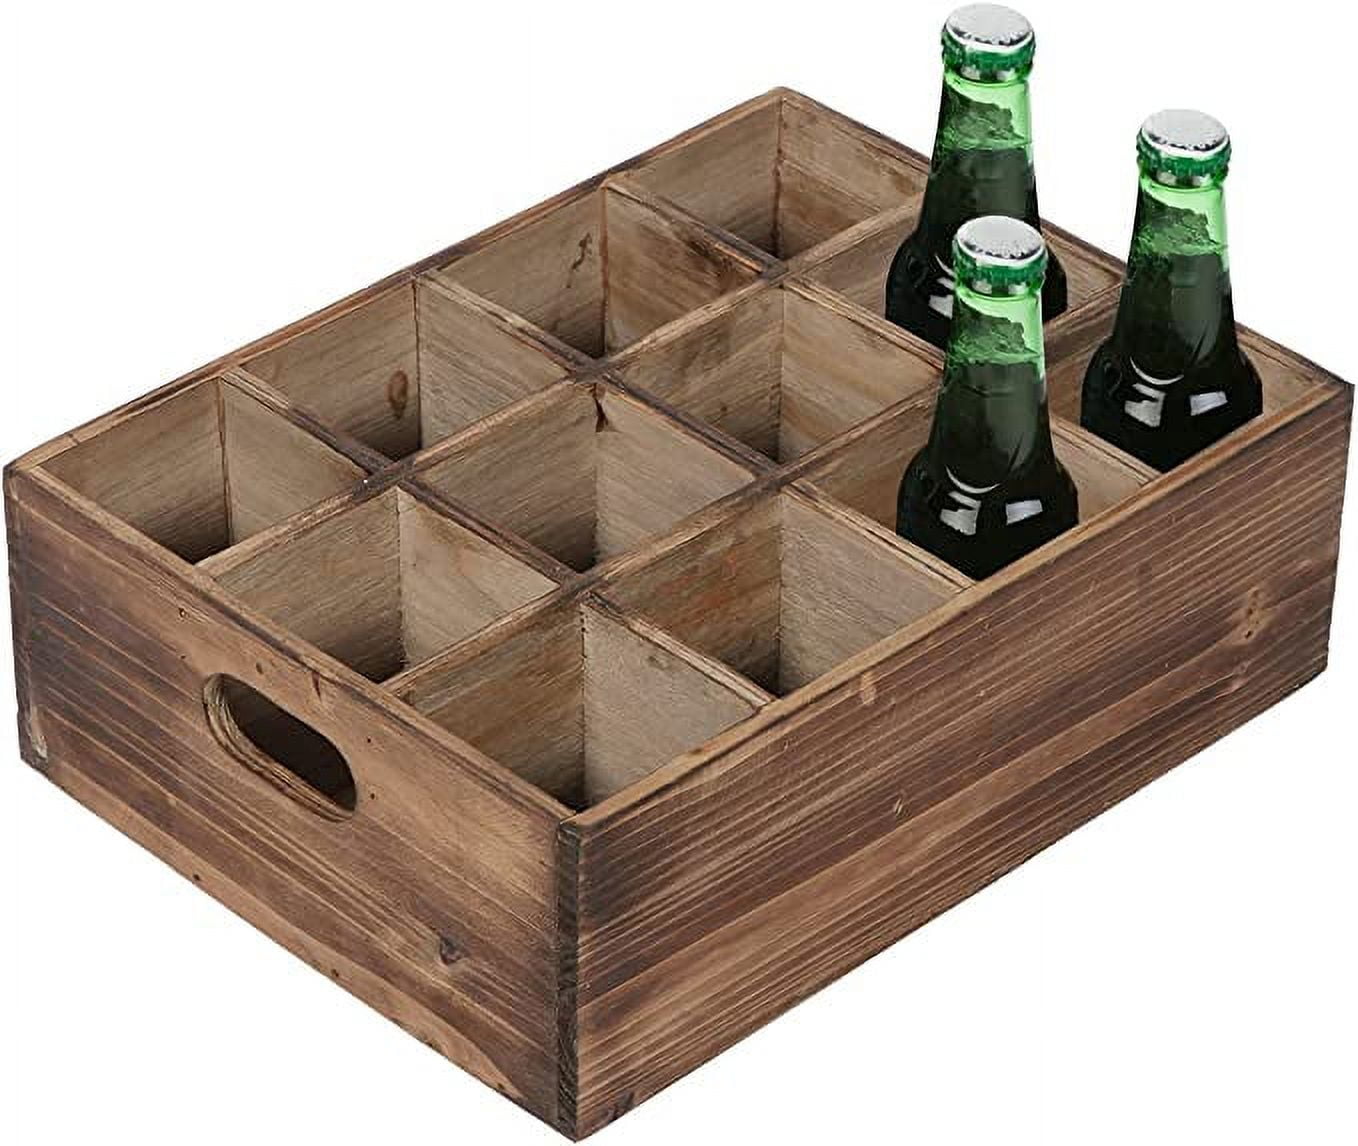 Buy Hand Crafted Stackable Wooden Crates, Beer Crates, Rustic